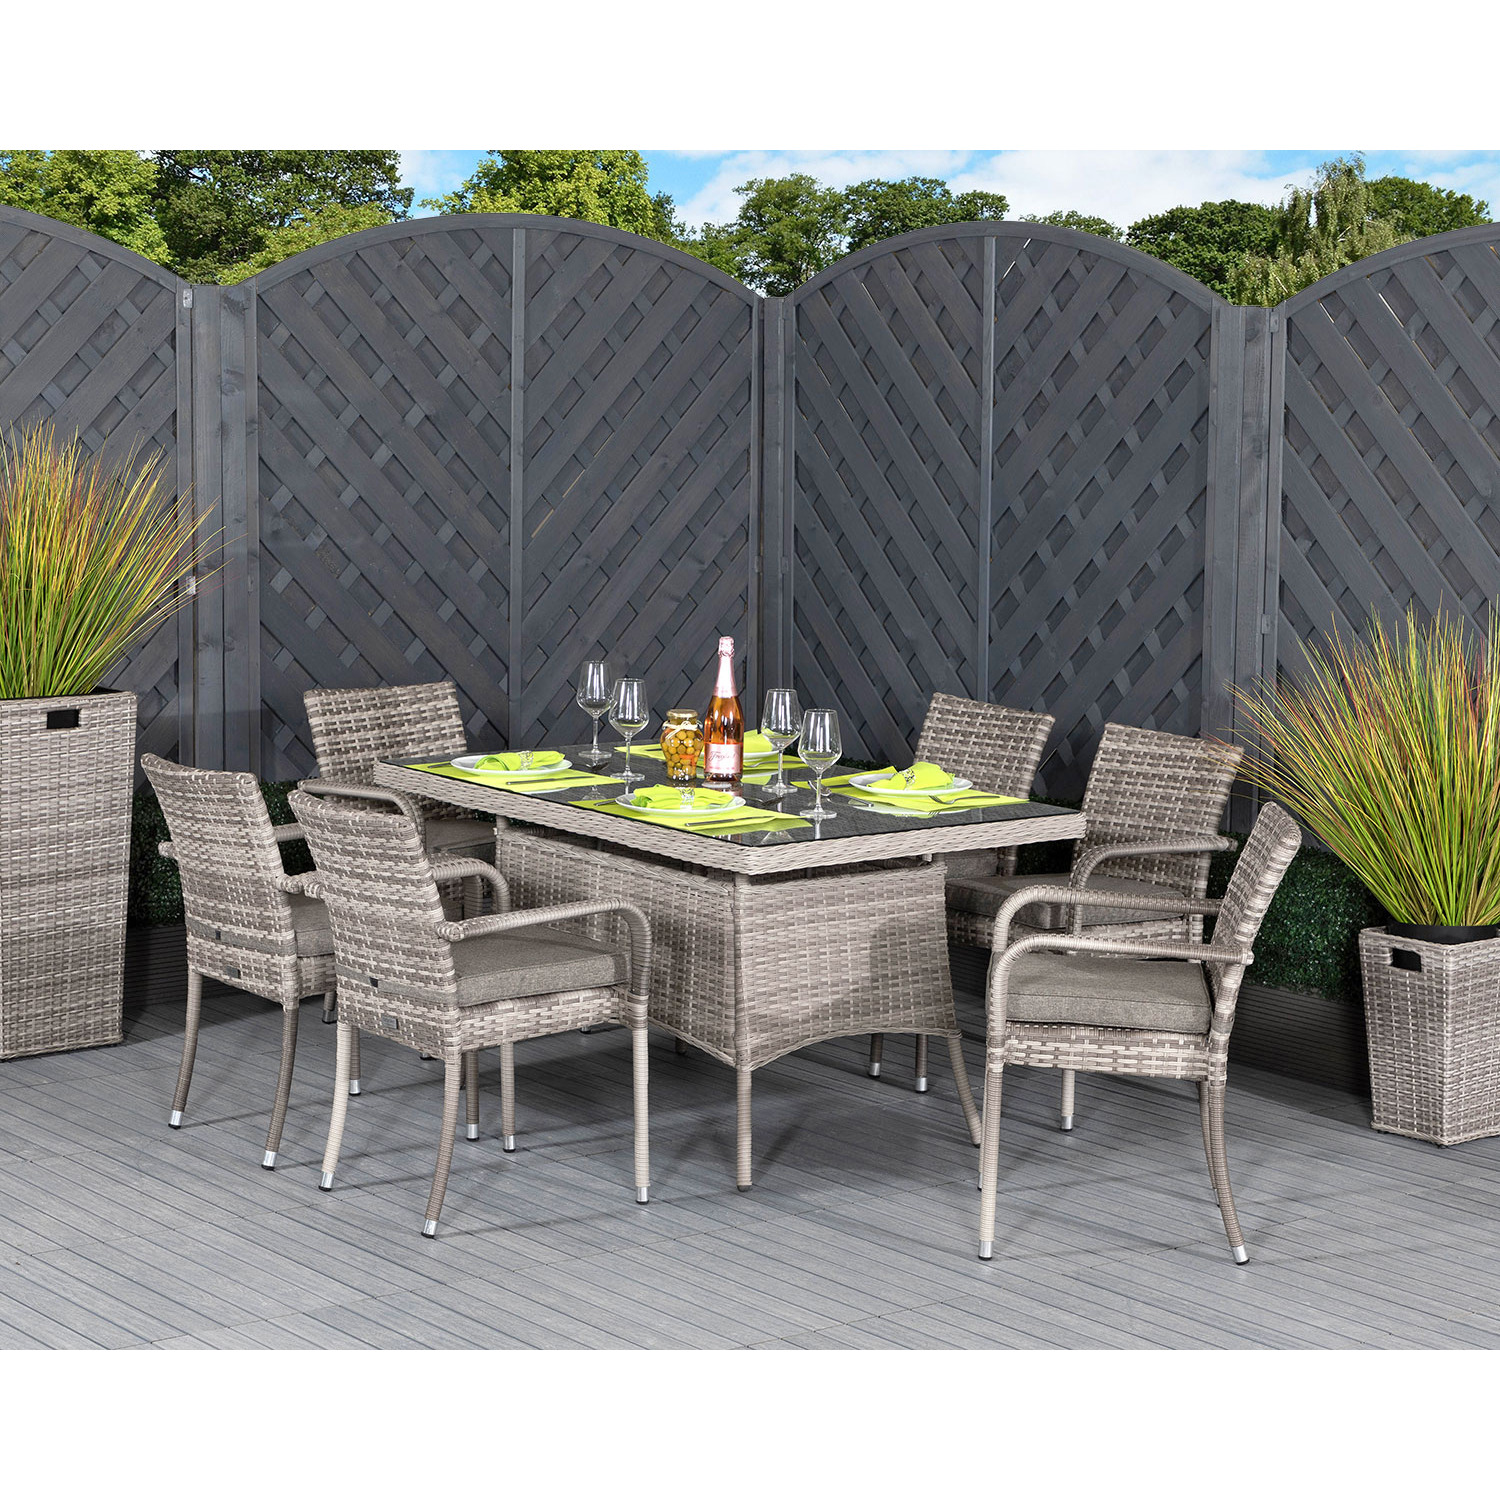 6 Seat Rattan Garden Dining Set With Small Rectangular Dining Table in Grey - Roma - Rattan Direct